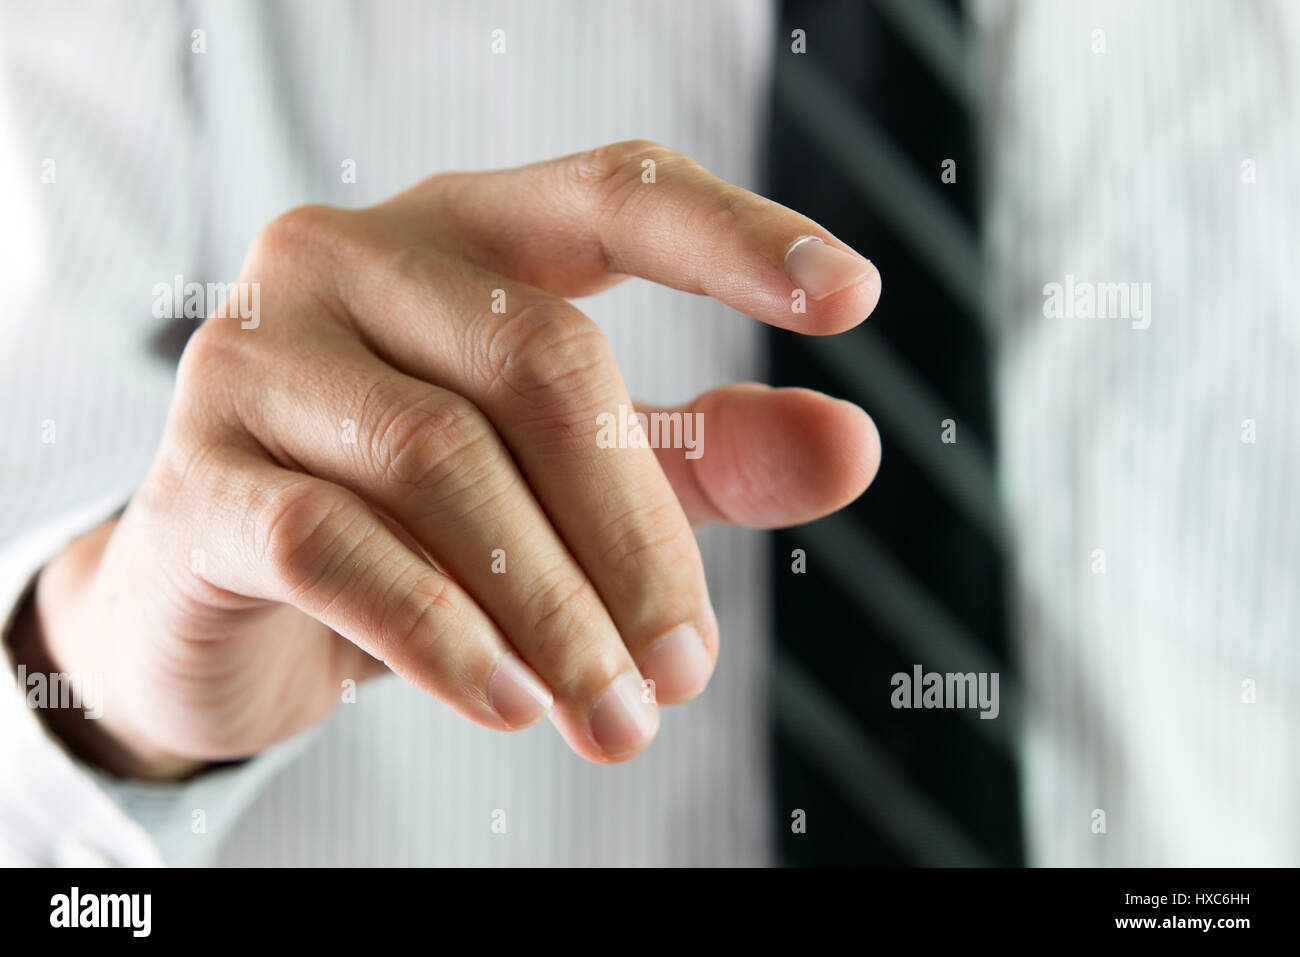 Businessman reaching out or touching virtual interface with his finger Stock Photo